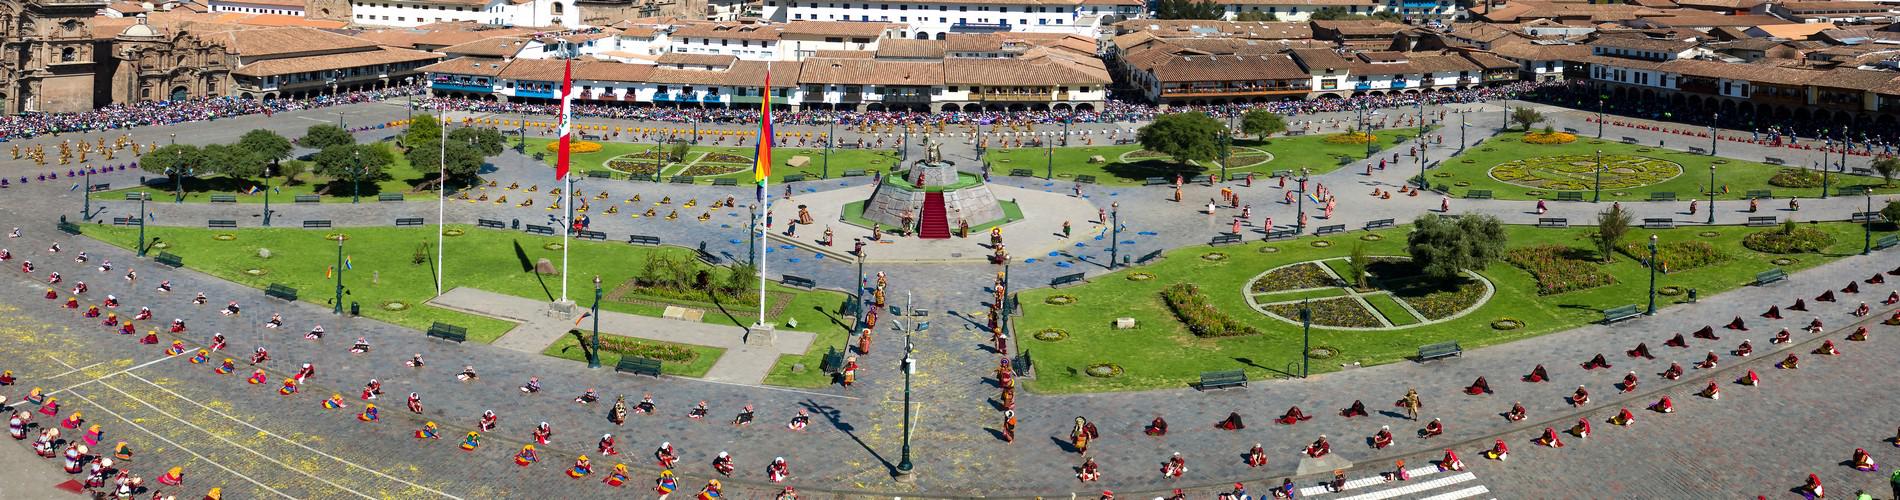 What is Inti Raymi?